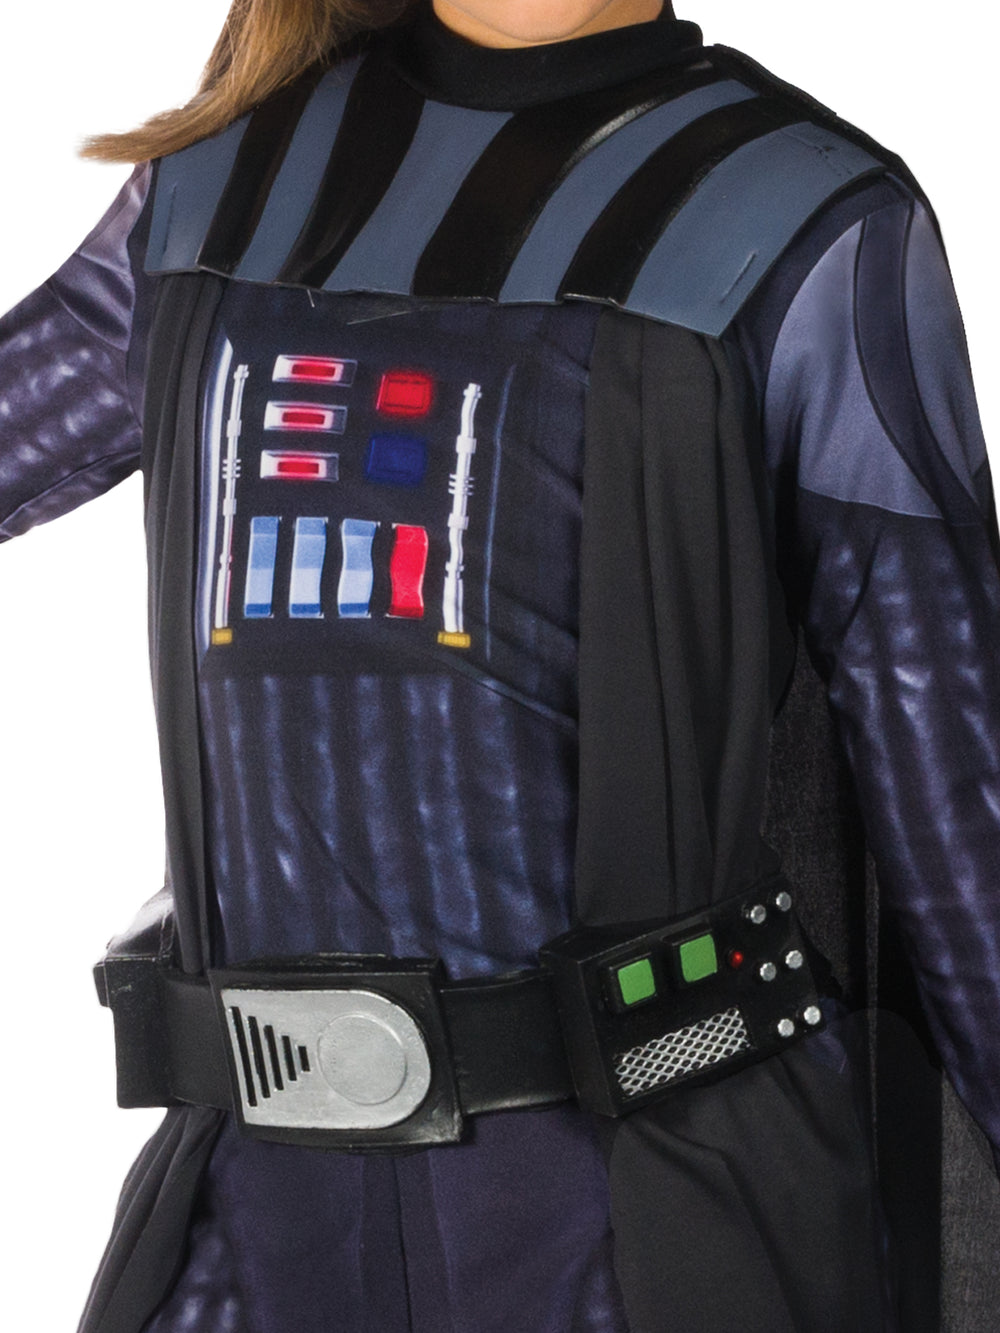 DARTH VADER DELUXE COSTUME, CHILD - Little Shop of Horrors